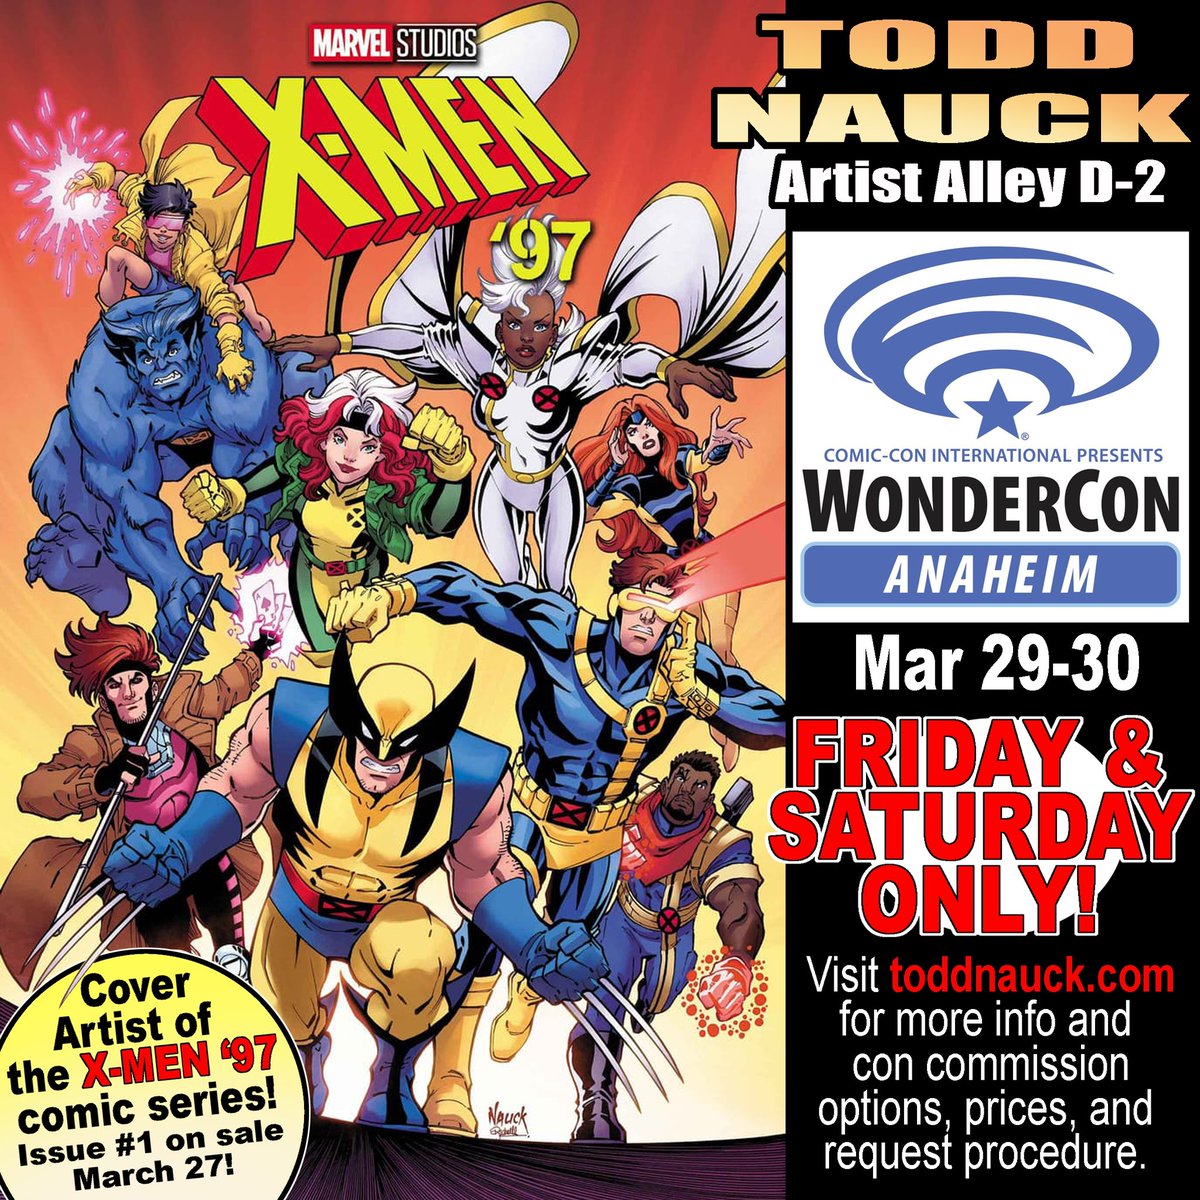 WonderCon Anaheim is this weekend! I will be there at Artist Alley table D-2 this Friday and Saturday ONLY! All of my con table and con commission info is on the top post of toddnauck.com.